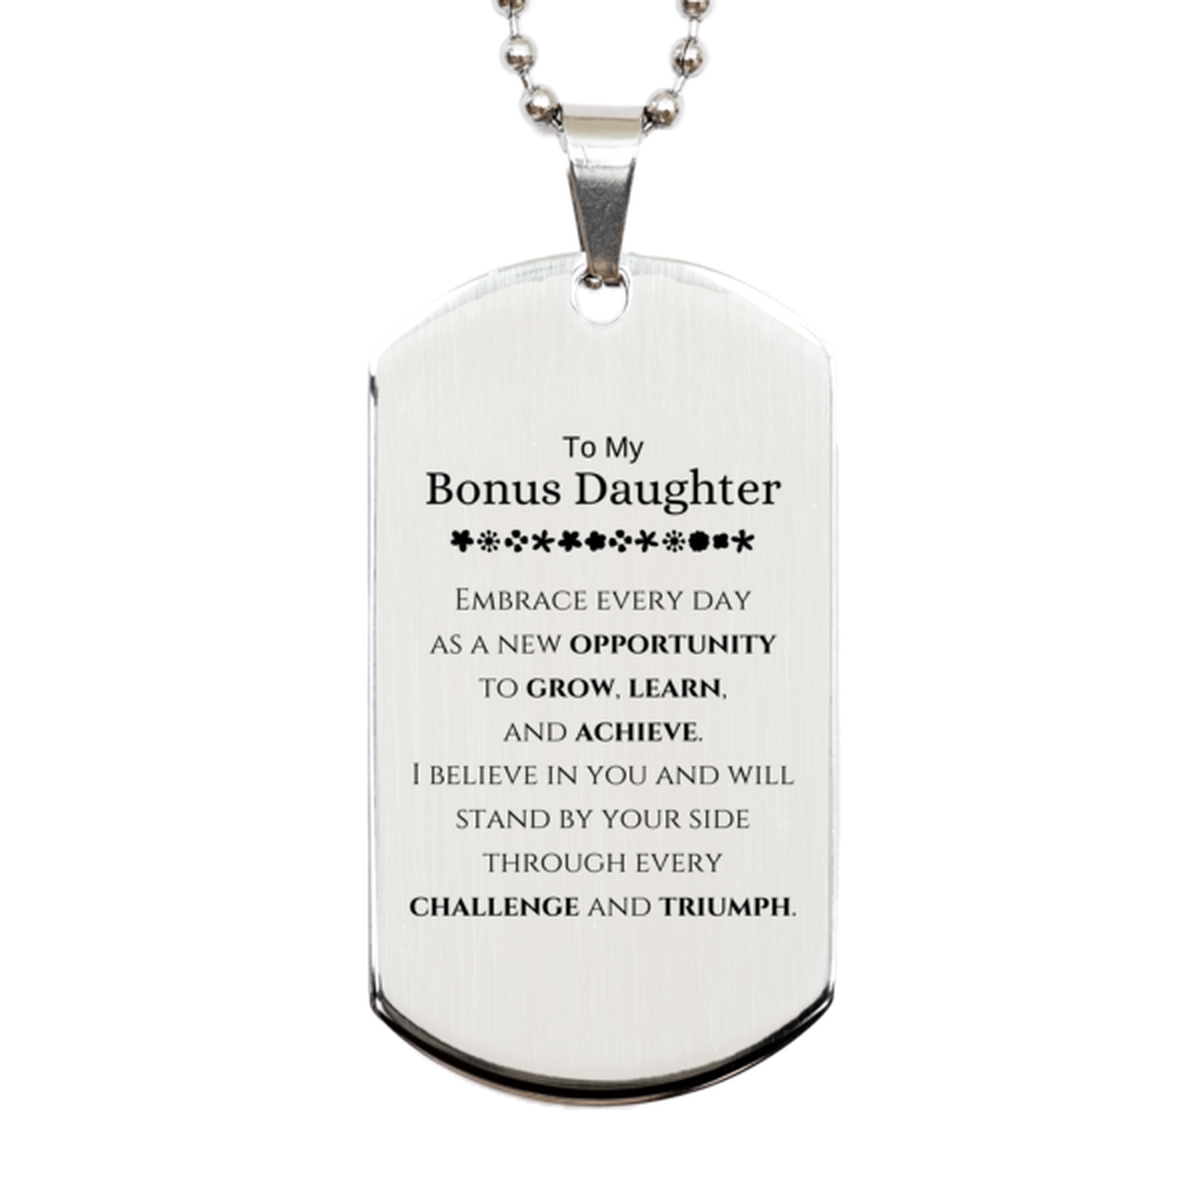 To My Bonus Daughter Gifts, I believe in you and will stand by your side, Inspirational Silver Dog Tag For Bonus Daughter, Birthday Christmas Motivational Bonus Daughter Gifts